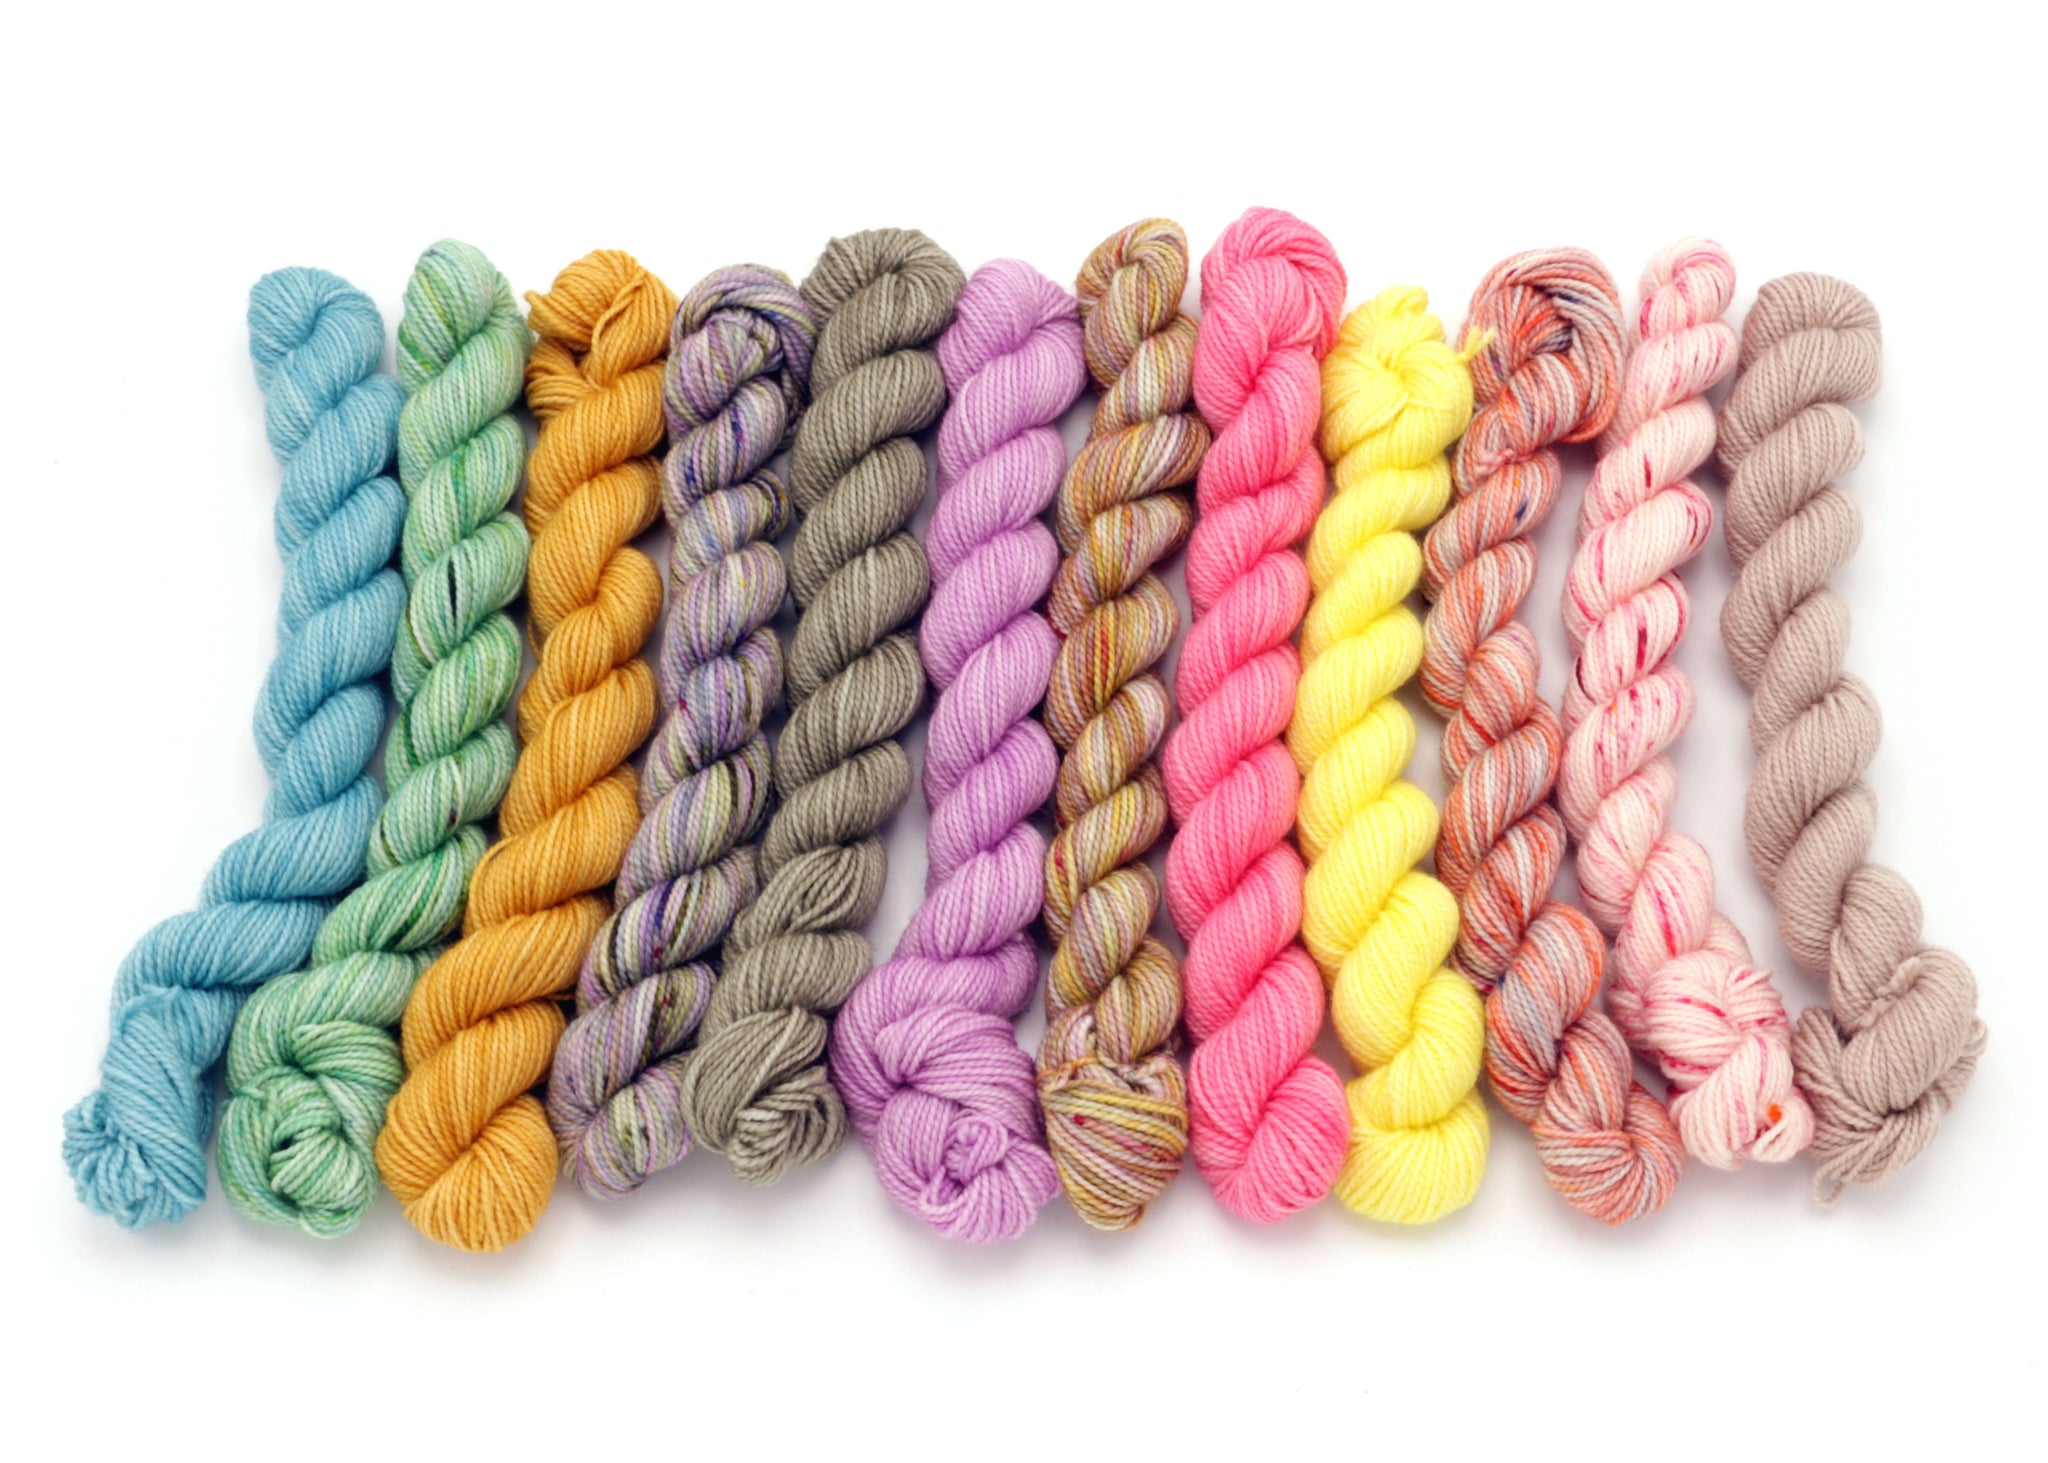 Your source for the best handpicked yarn and pattern kits - Yarn Loop